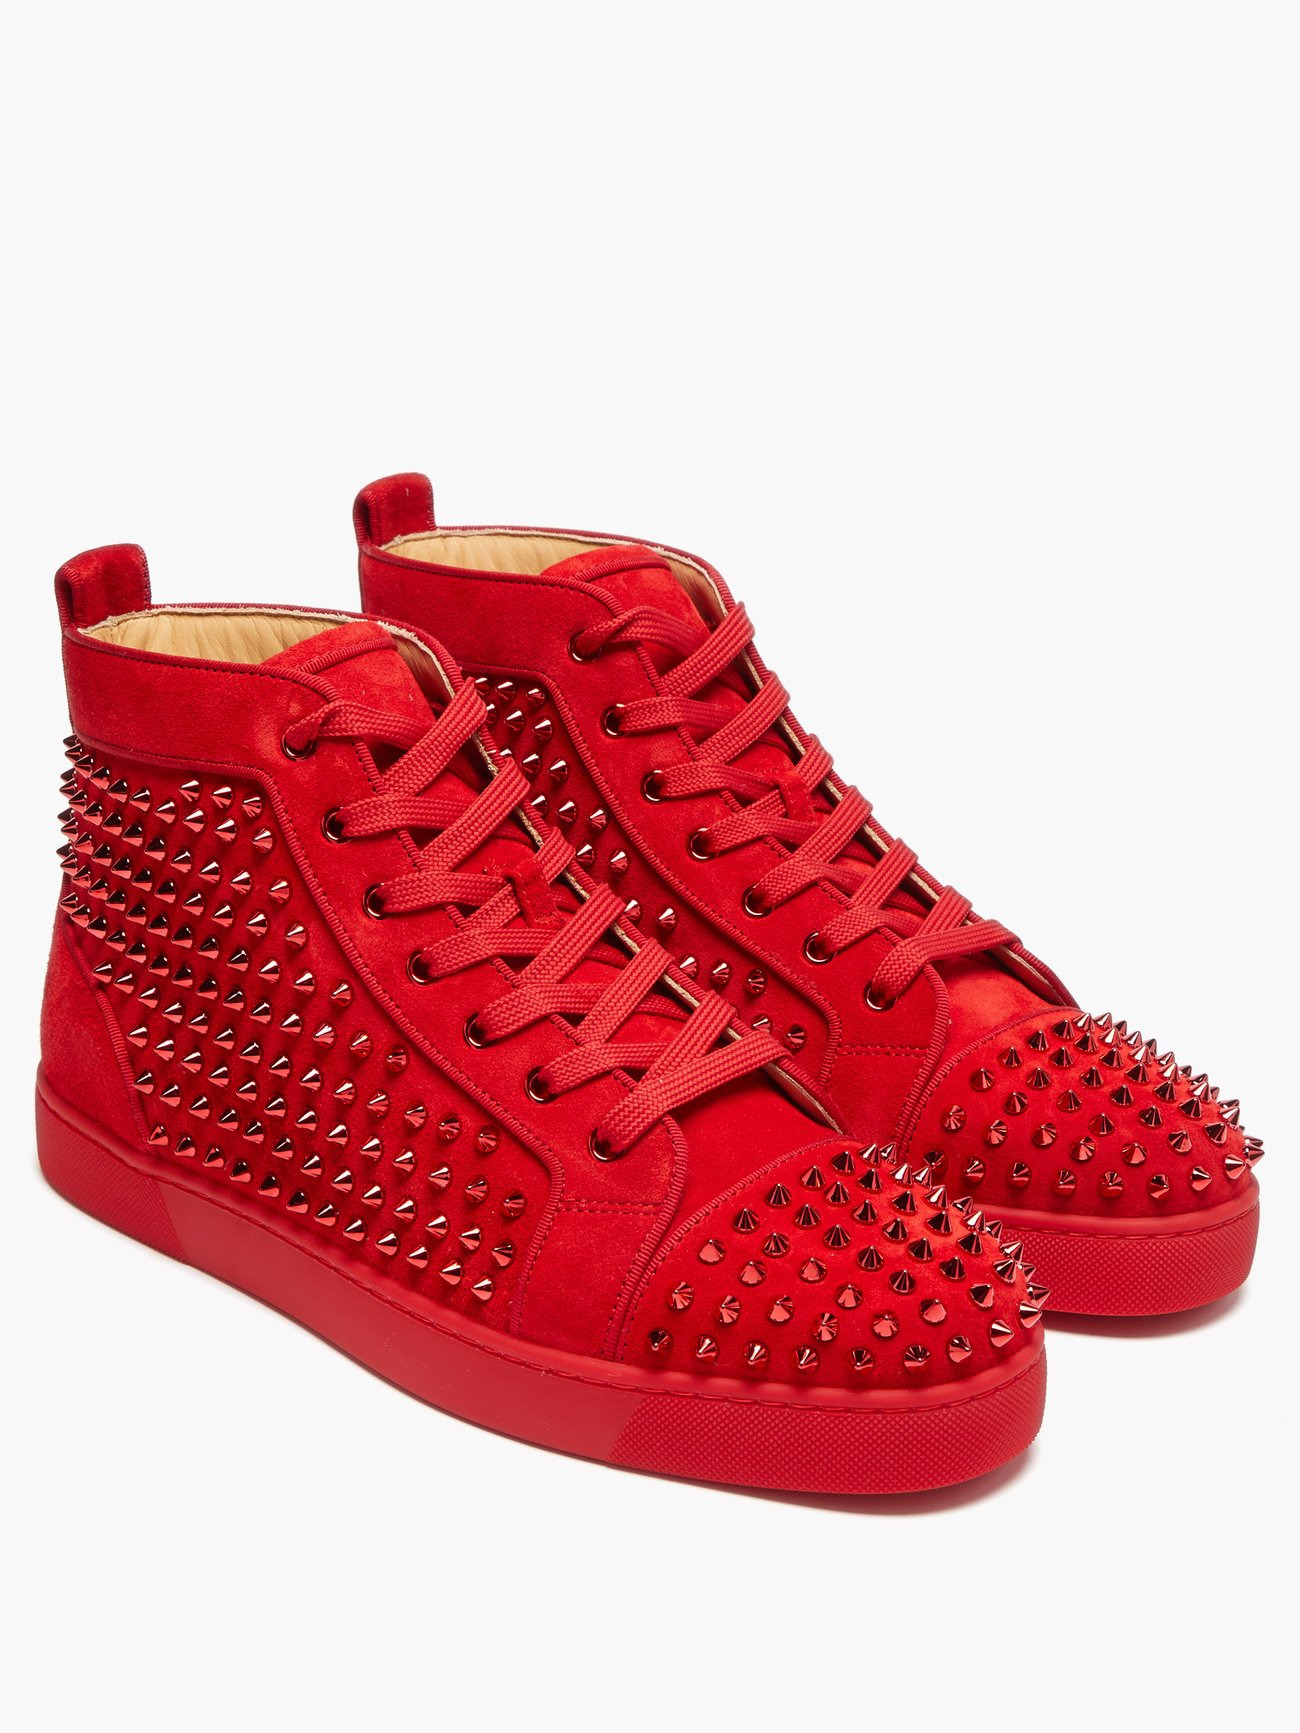 Christian Louboutin Men's Louis Orlato Red Sole High-top Trainers